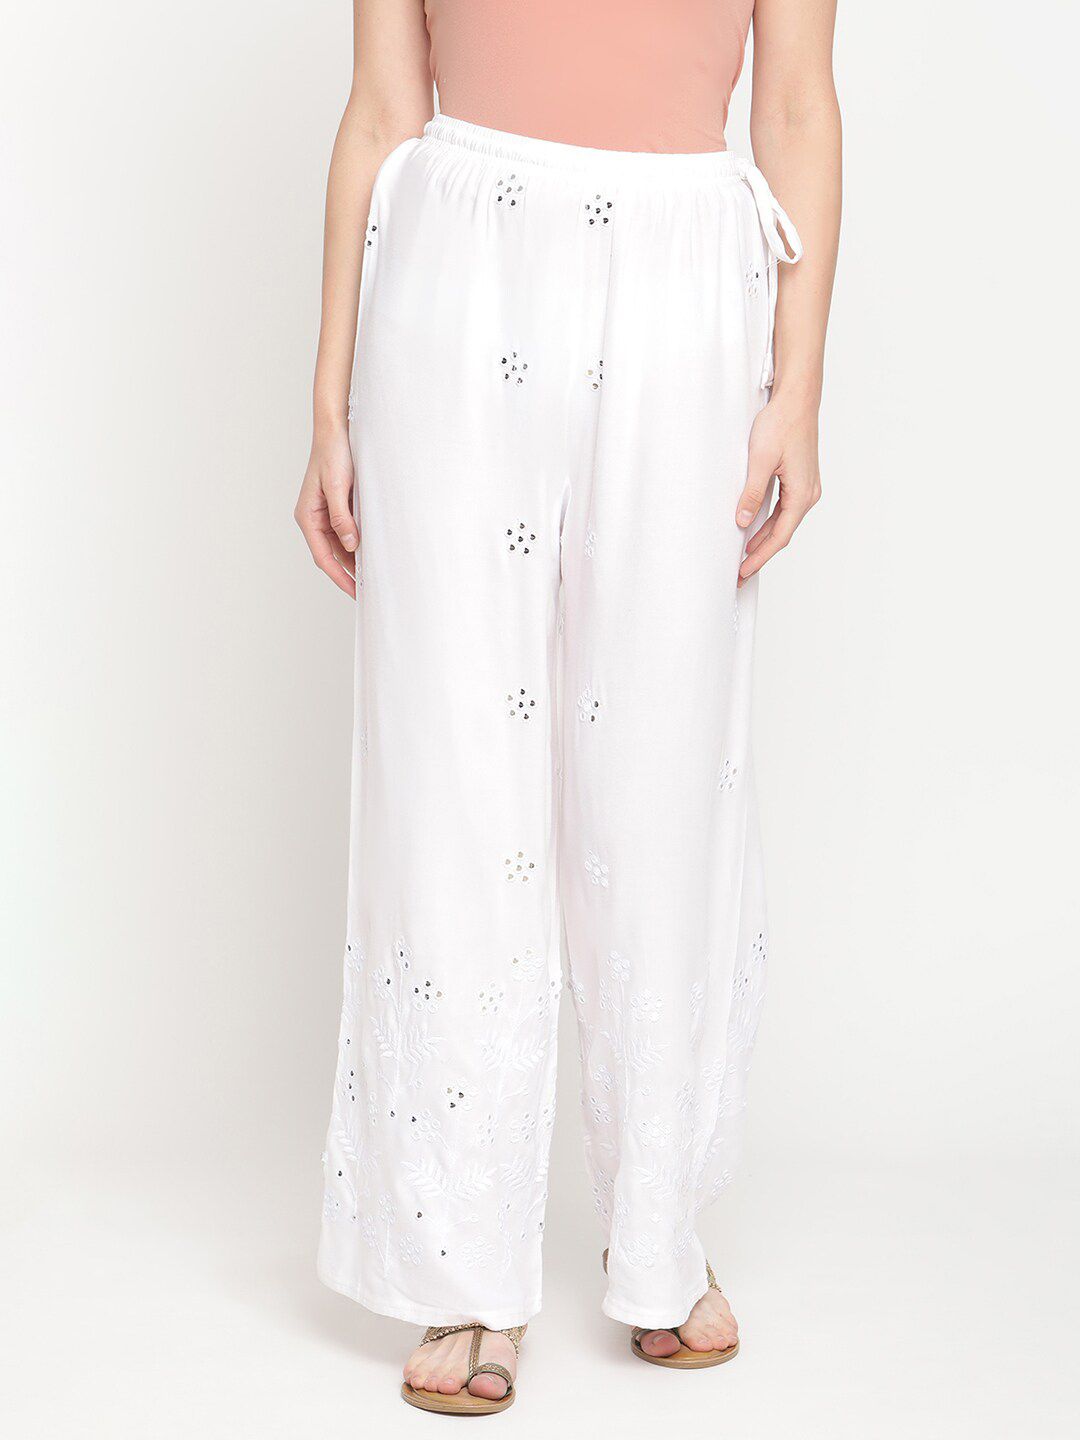 TAG 7 Women White Rayon Palazzos Price in India